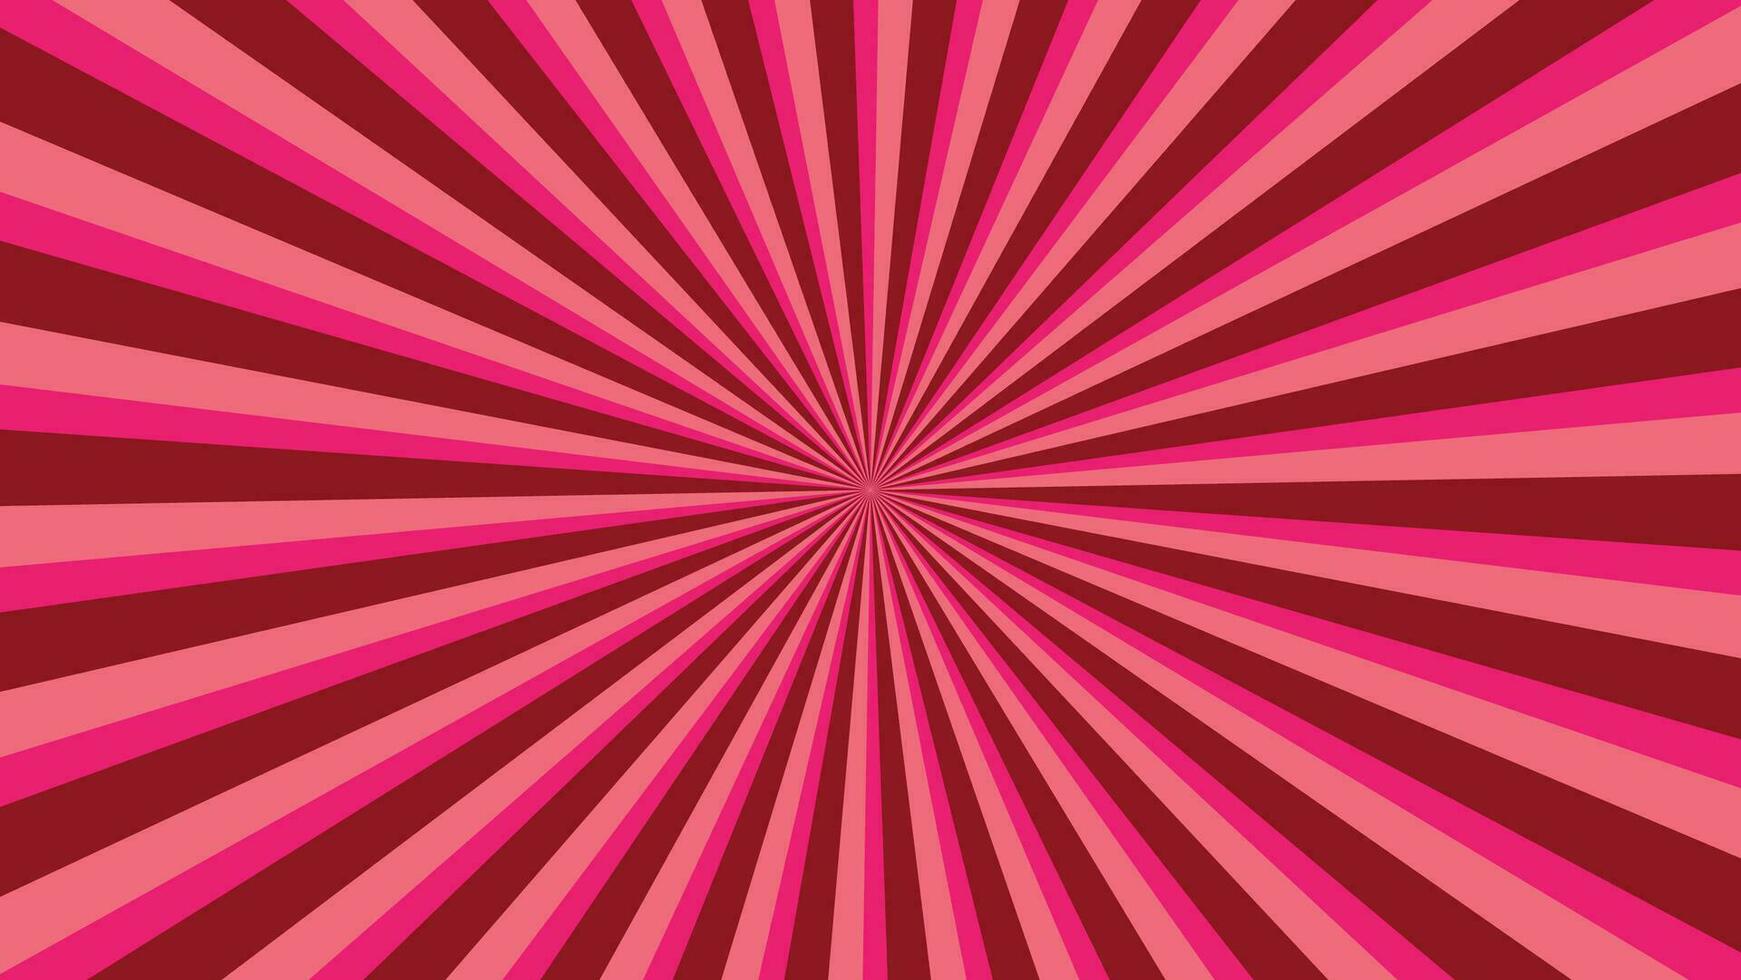 abstract pink and red sunburst pattern background for modern graphic design element. shining ray cartoon with colorful for website banner wallpaper and poster card decoration vector